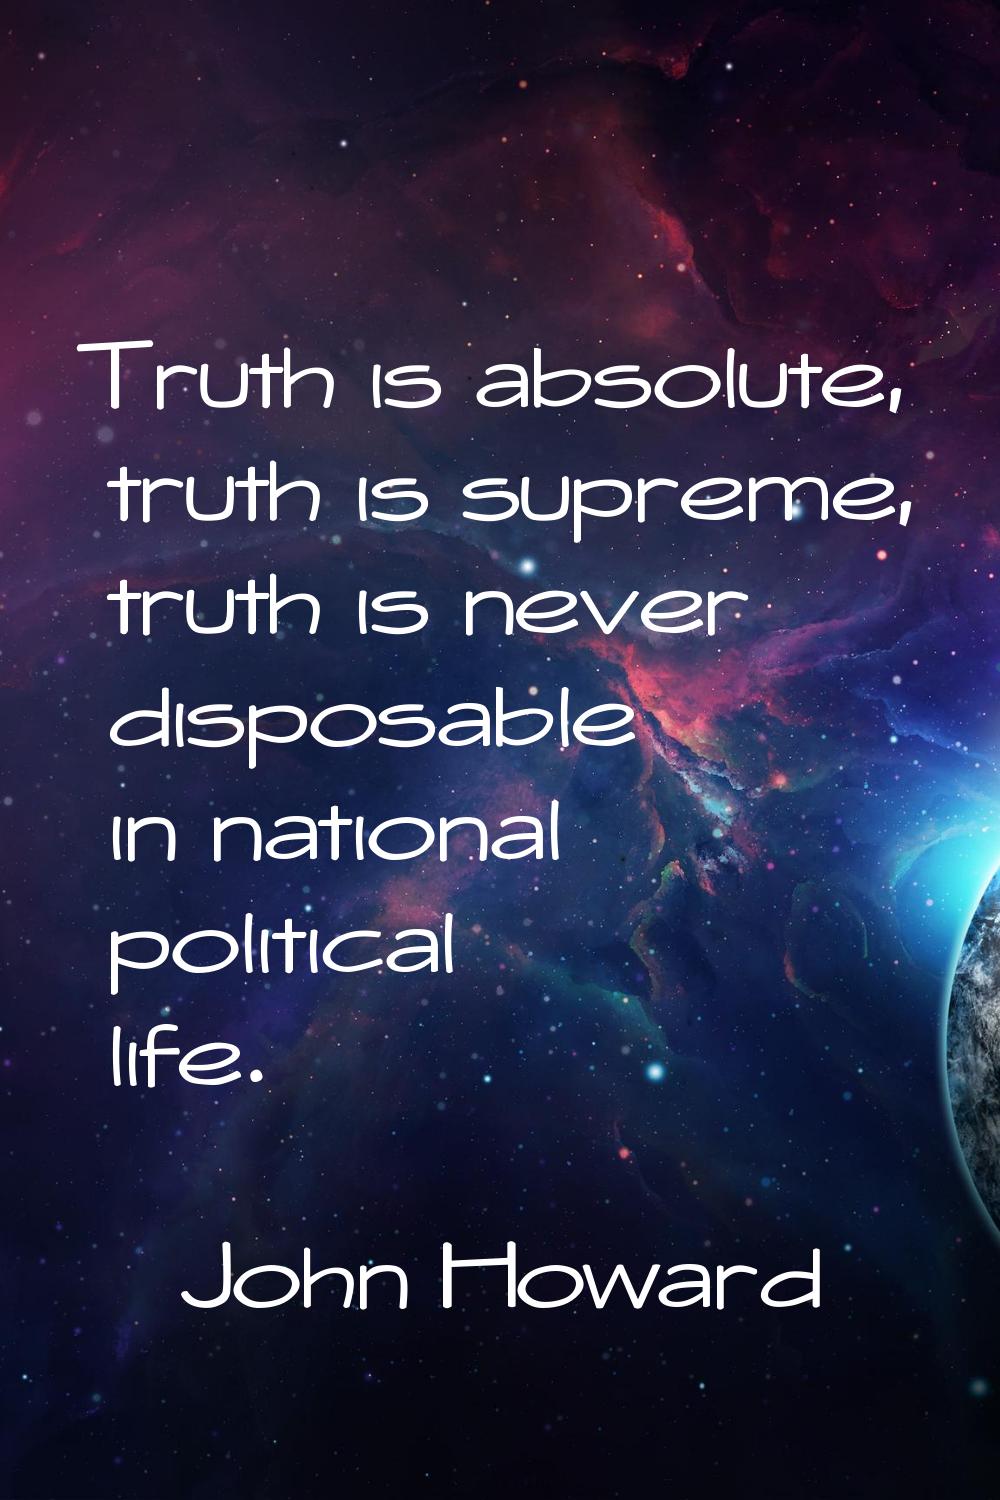 Truth is absolute, truth is supreme, truth is never disposable in national political life.